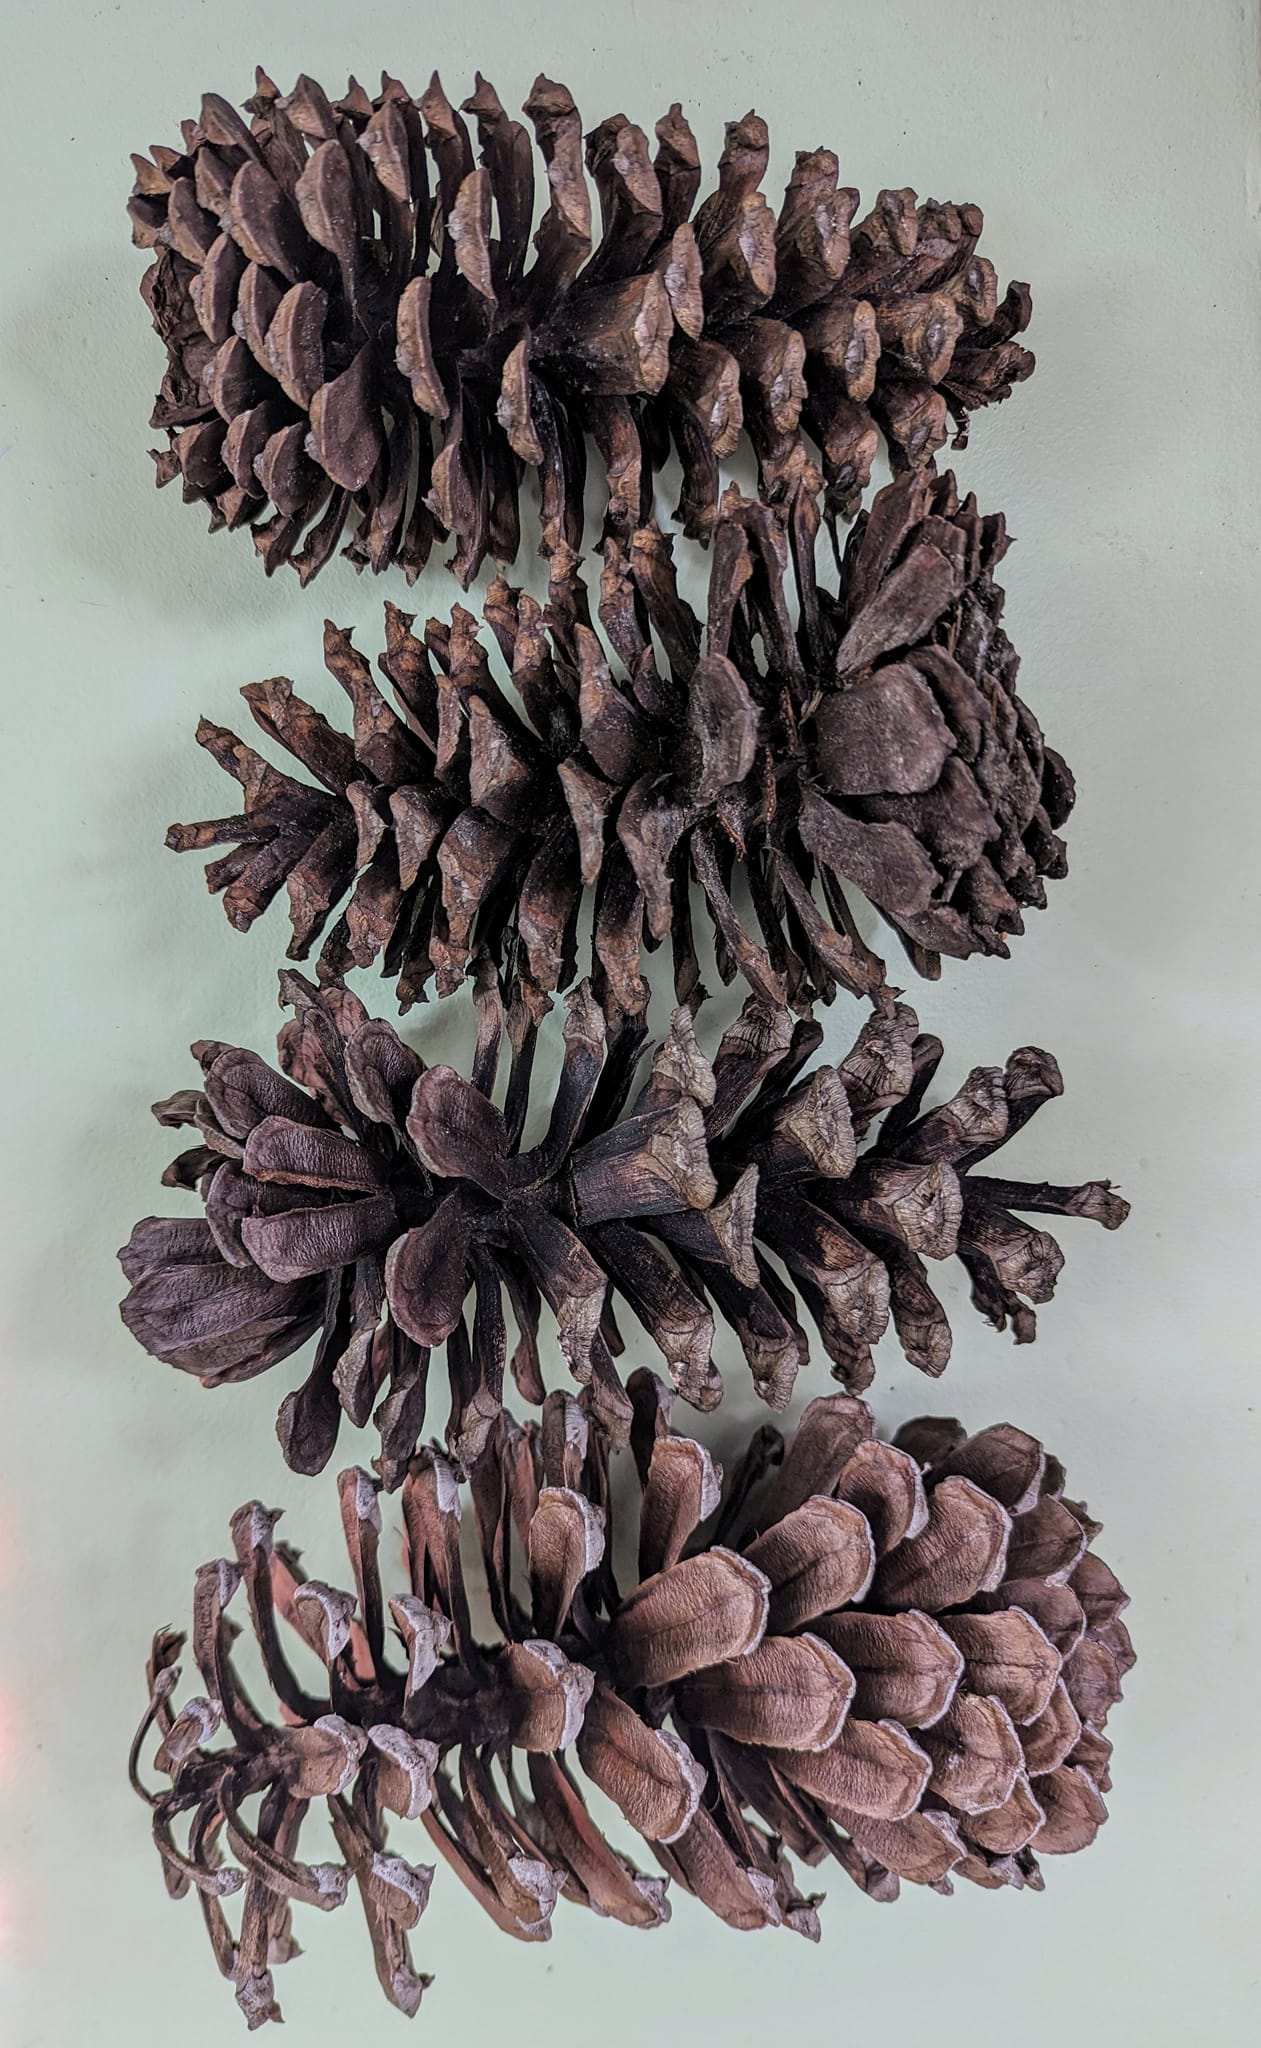 Imperfect Extra Large Pinecones Scented or Unscented Set of 4